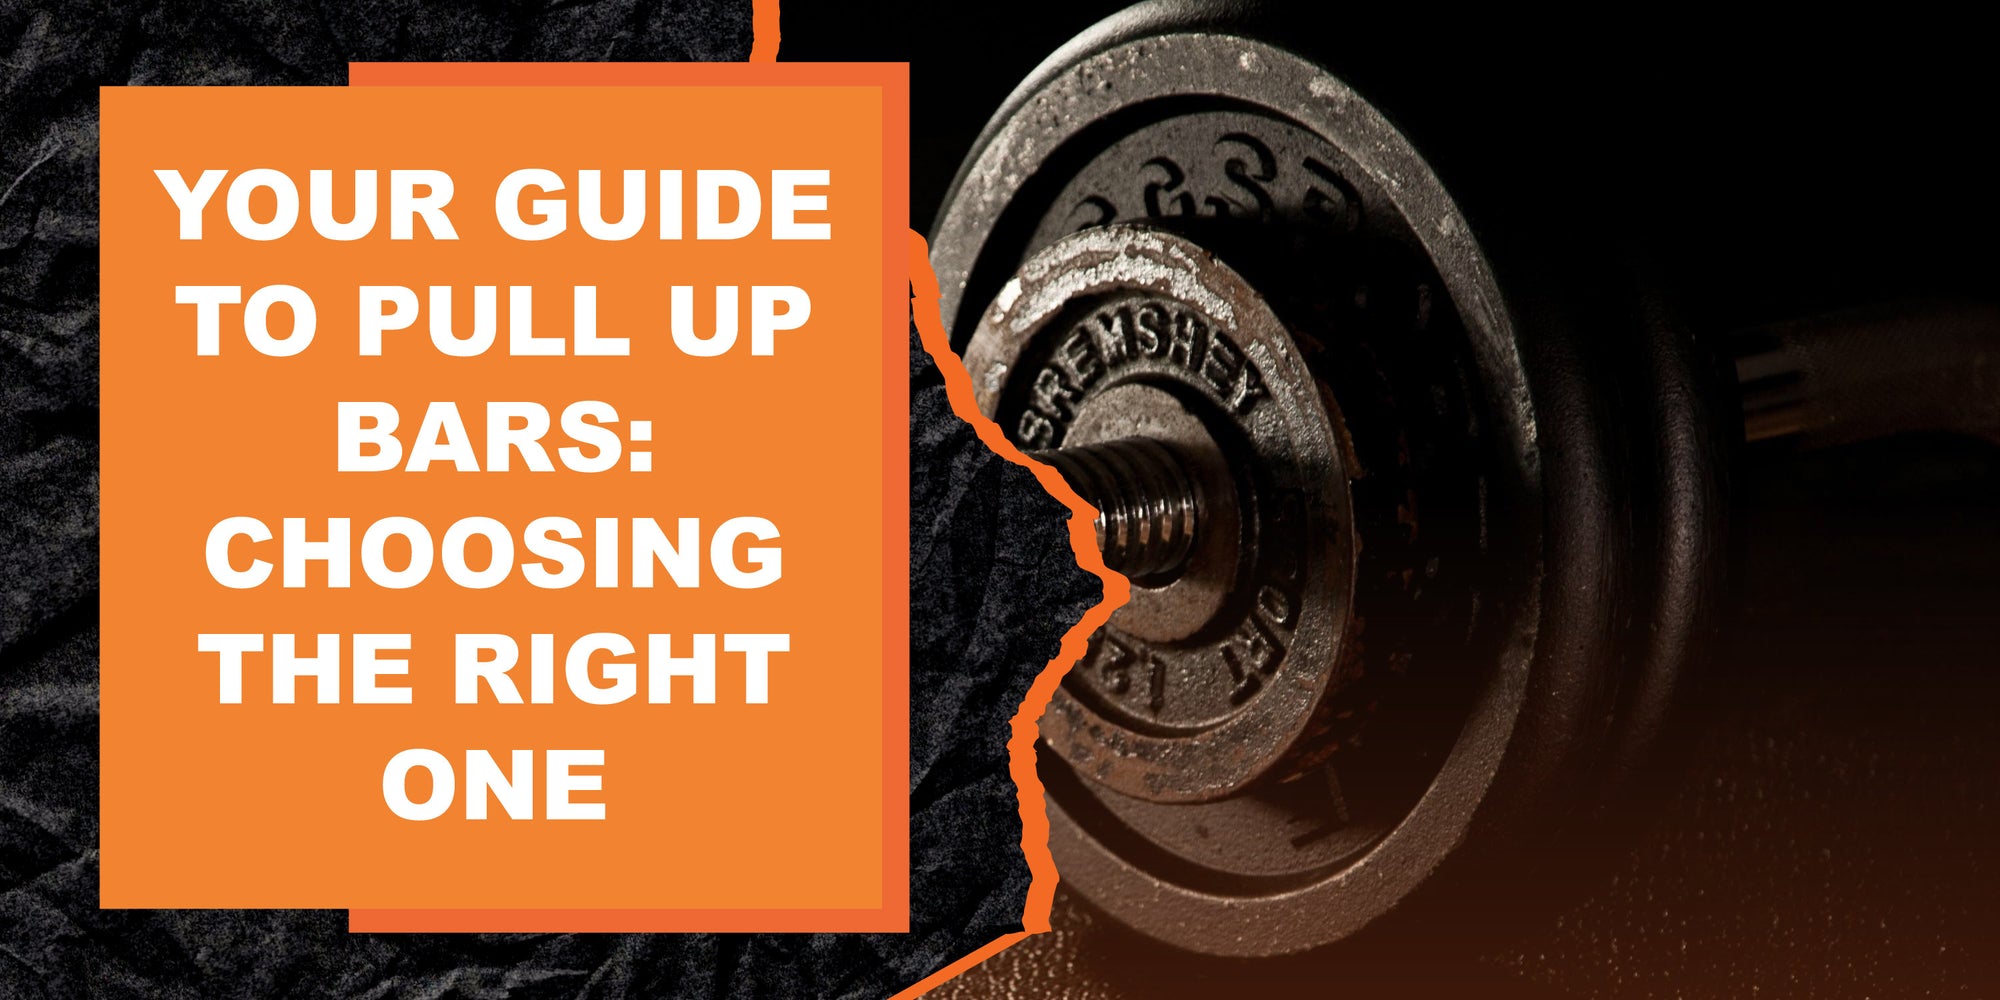 Your Guide to Pull Up Bars: Choosing the Right One